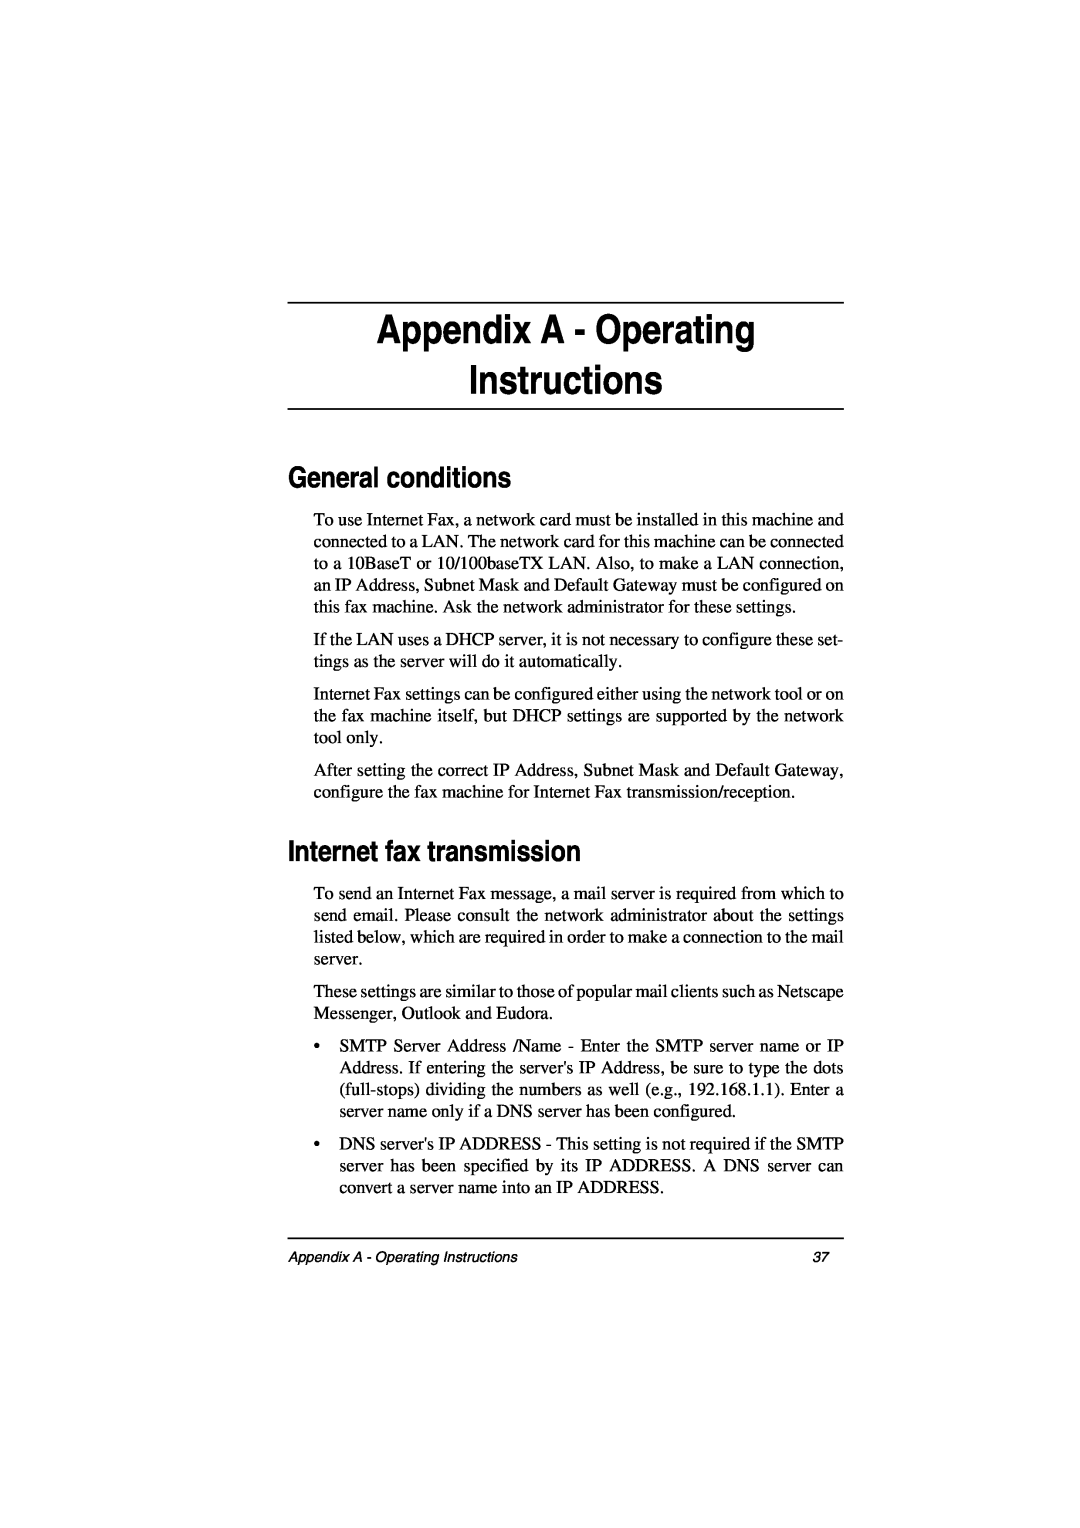 Oki ii manual Appendix A - Operating Instructions, General conditions, Internet fax transmission 